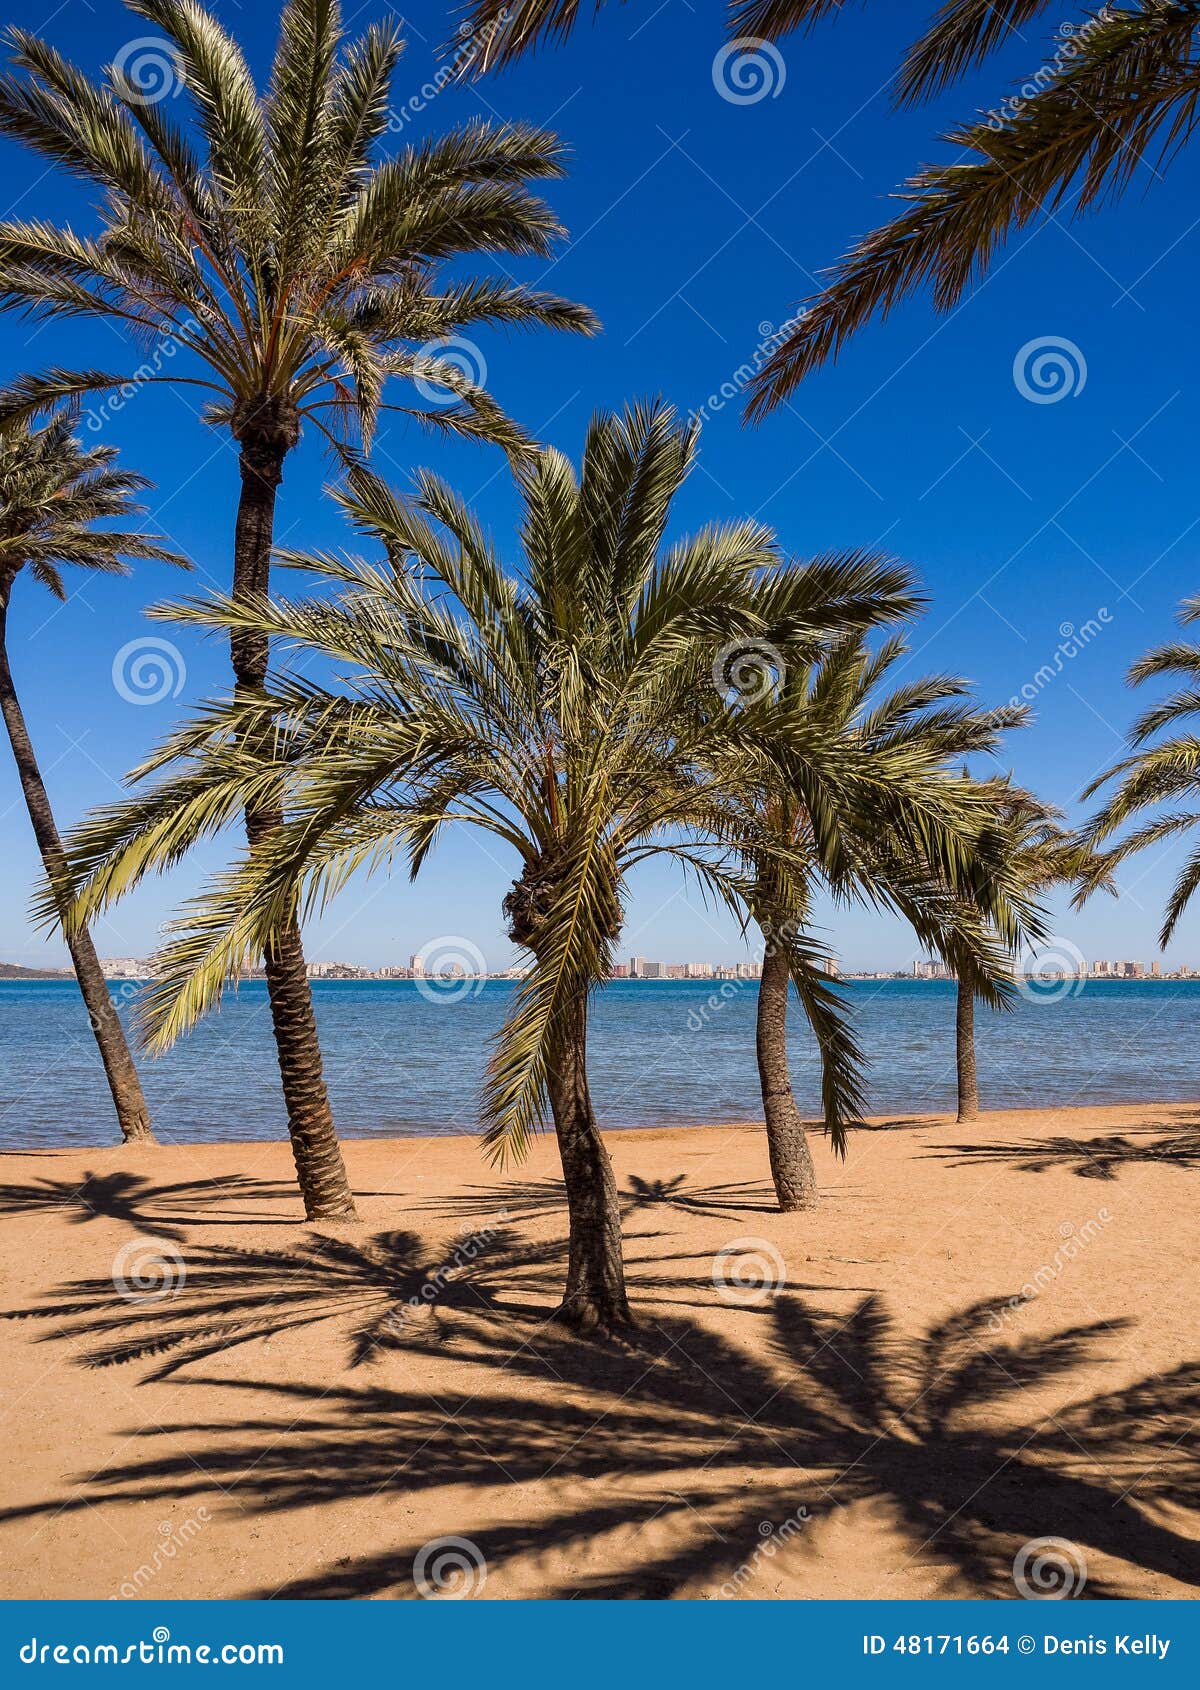 beach with palm trees in spain